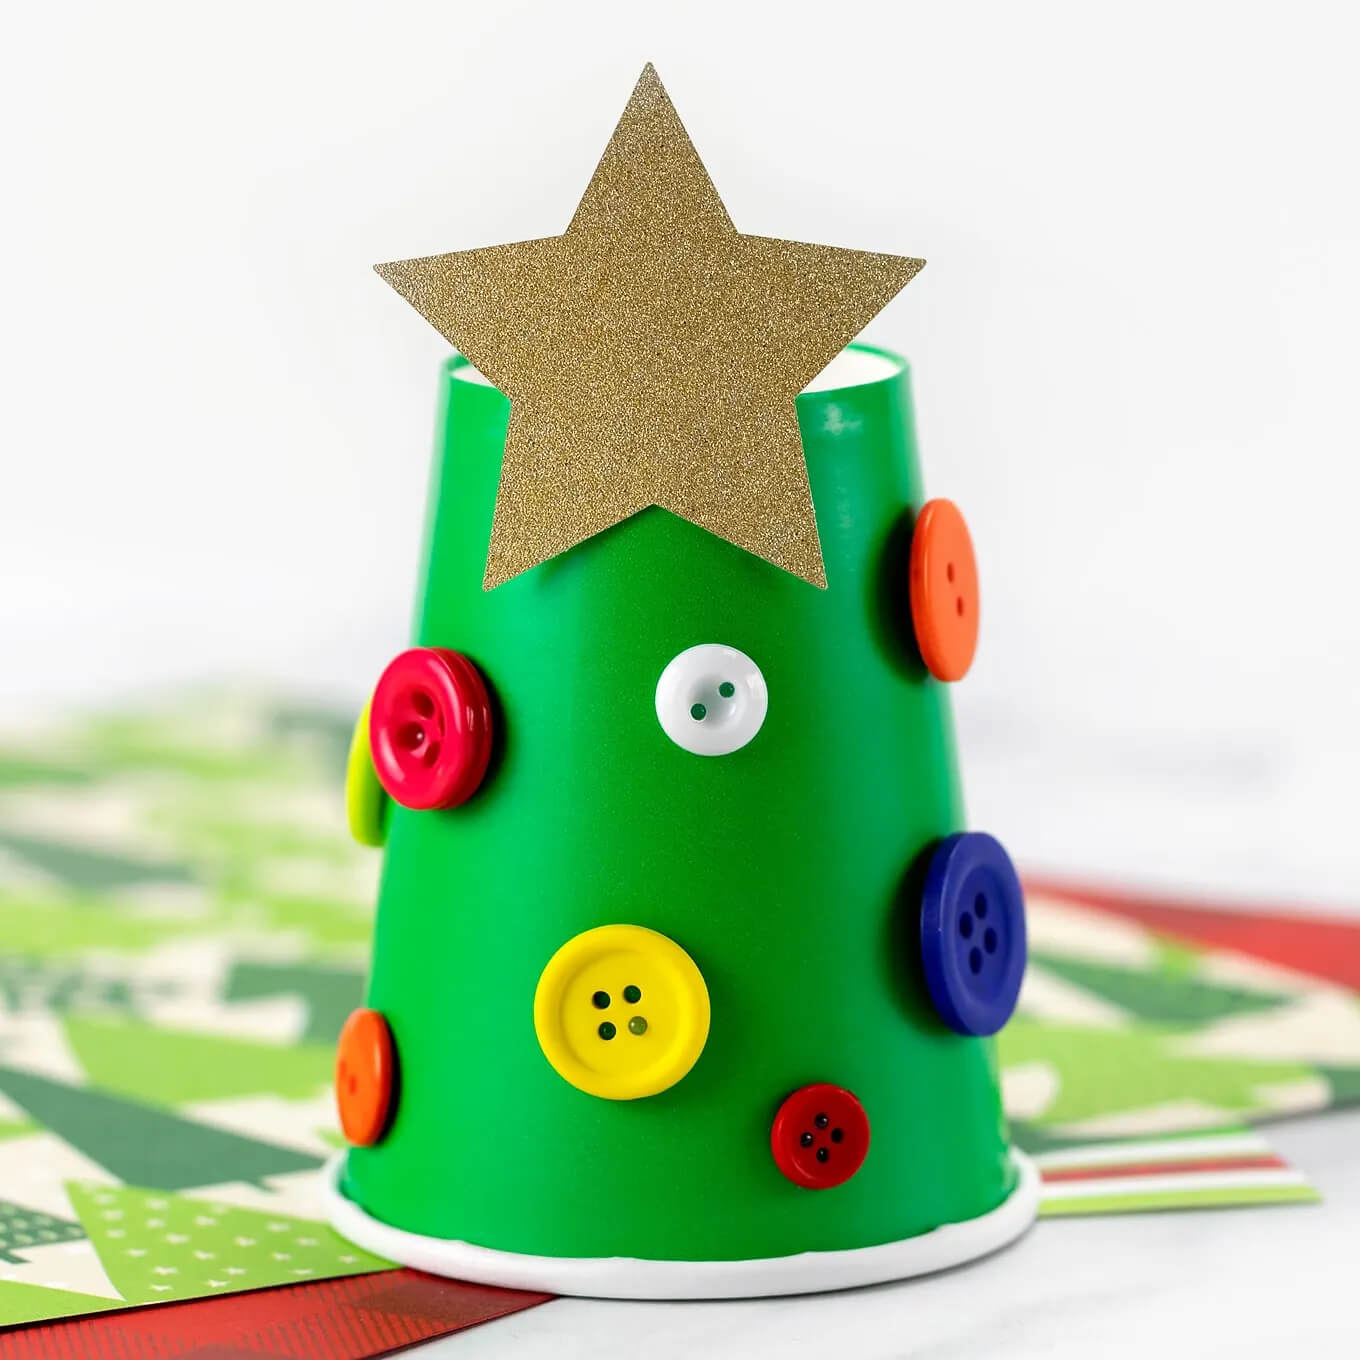 DIY Christmas Tree Decoration Craft With Paper Cup & Buttons For Toddlers